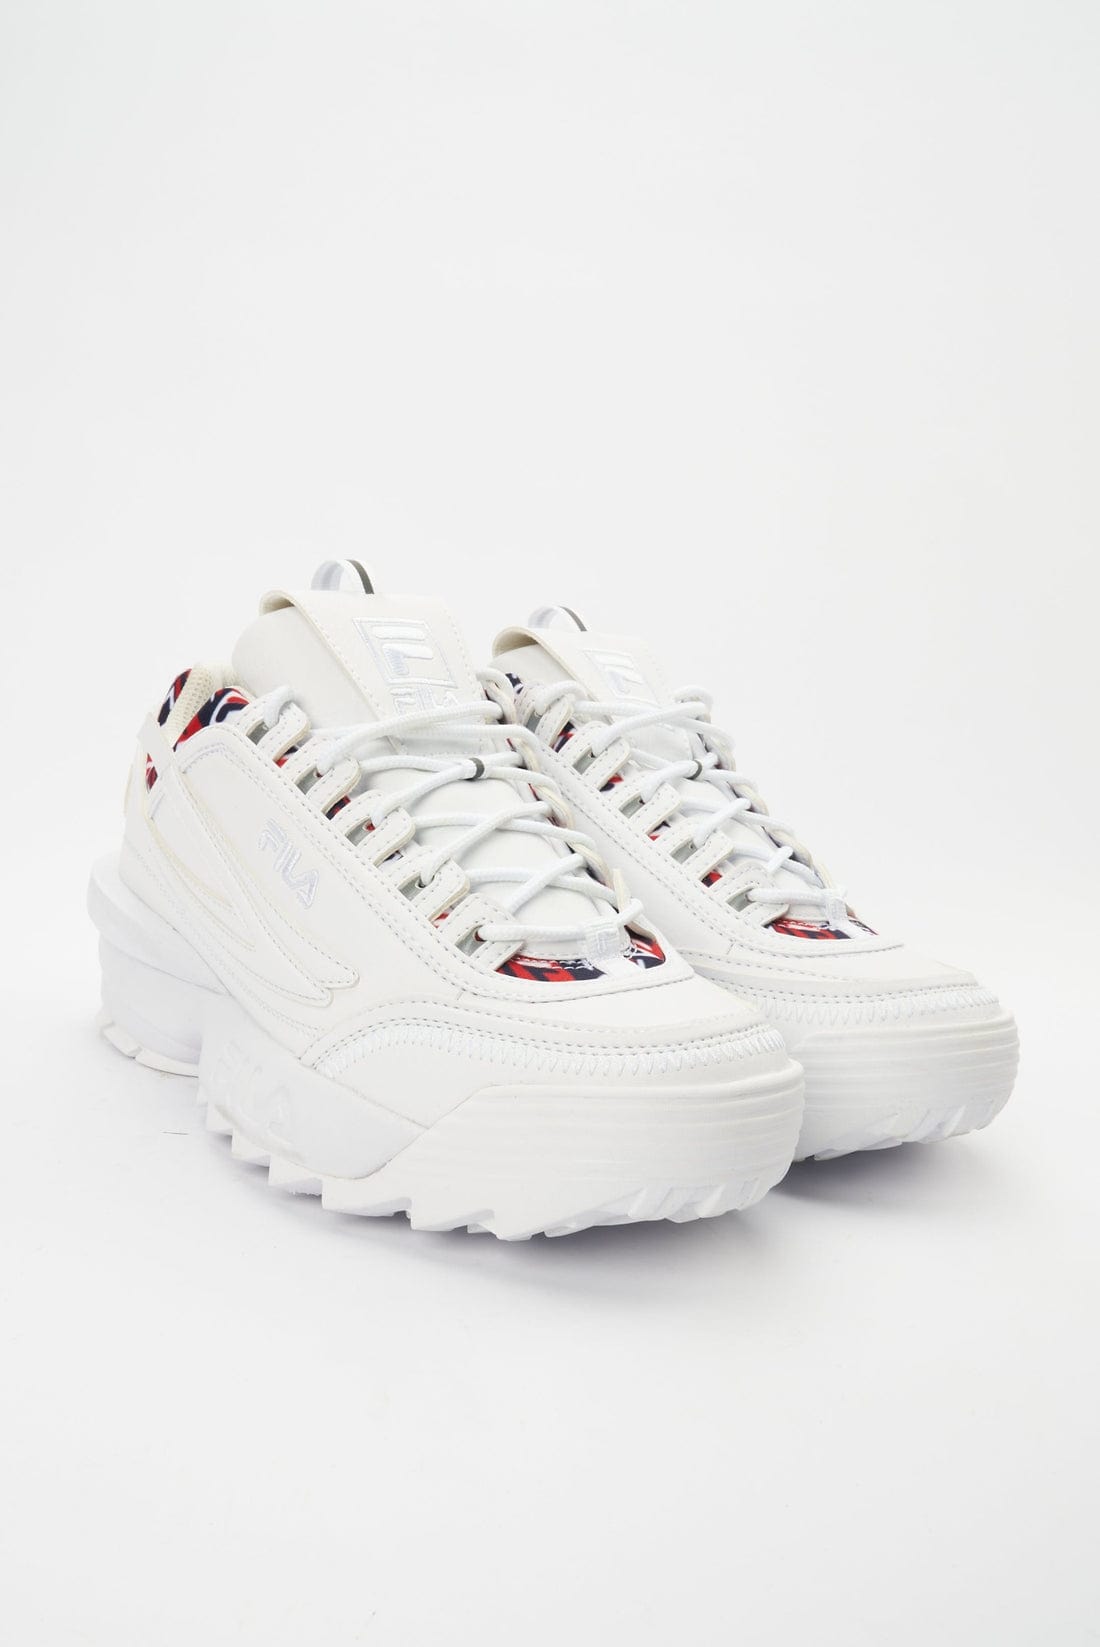 vergeven Roux Professor Fila Ladies Sneakers Disruptor 2 White for Sale ✔️ Lowest Price Guaranteed